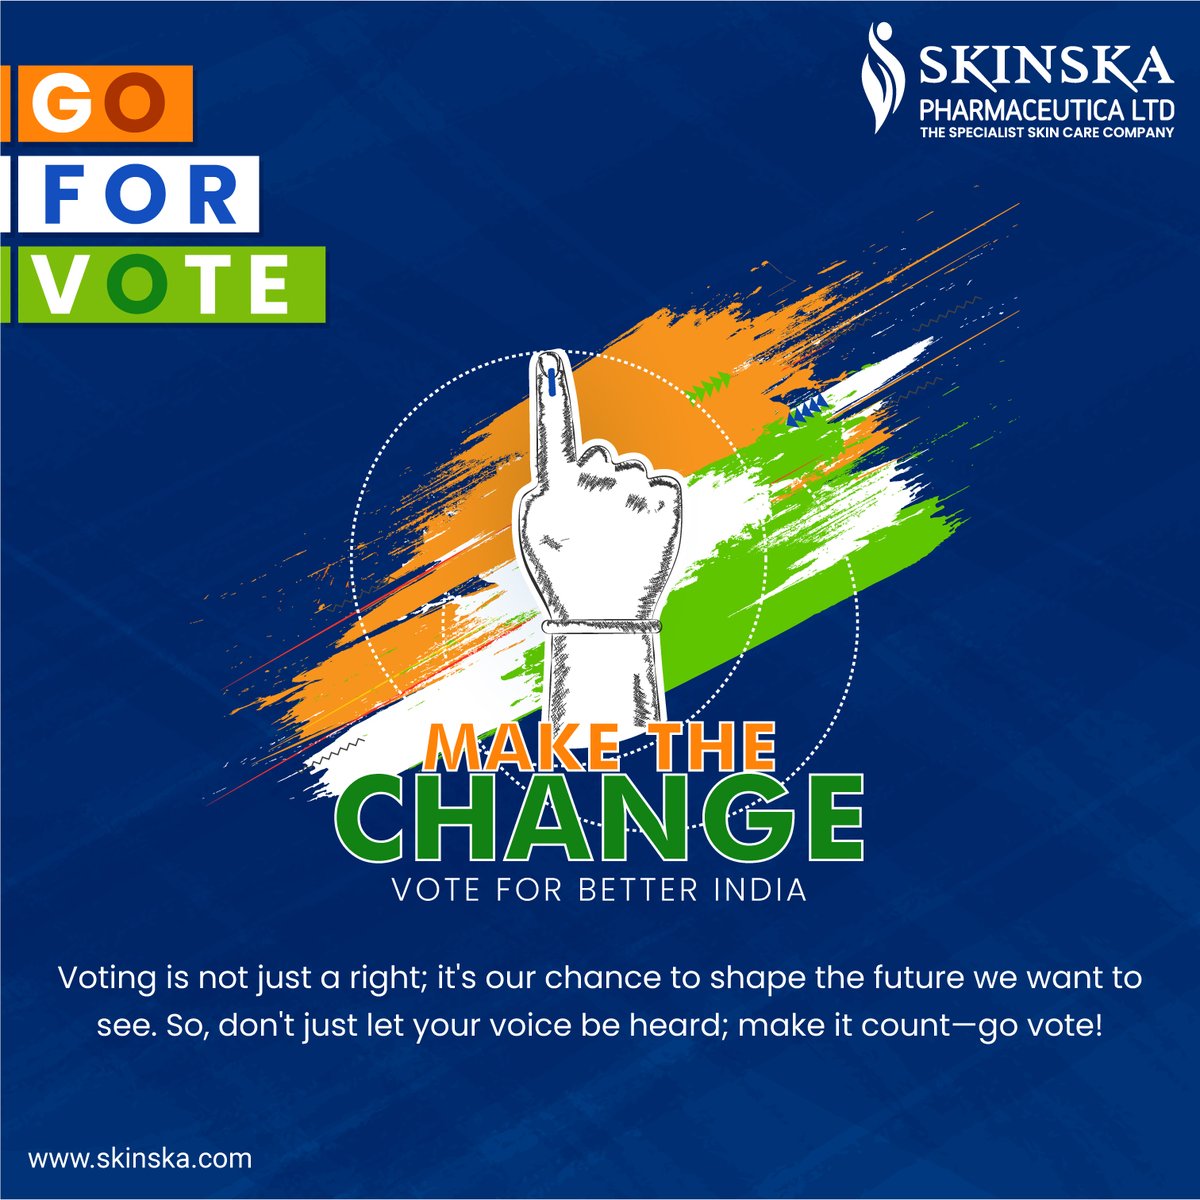 Voting is not just a right; it's our chance to shape the future we want to see. So, don't just let your voice be heard; make it count—go vote! #voting #vote #election #politics #elections #votingmatters #democracy #india #bjp #modi #telangana #andhra #skinska #skinskanaturals